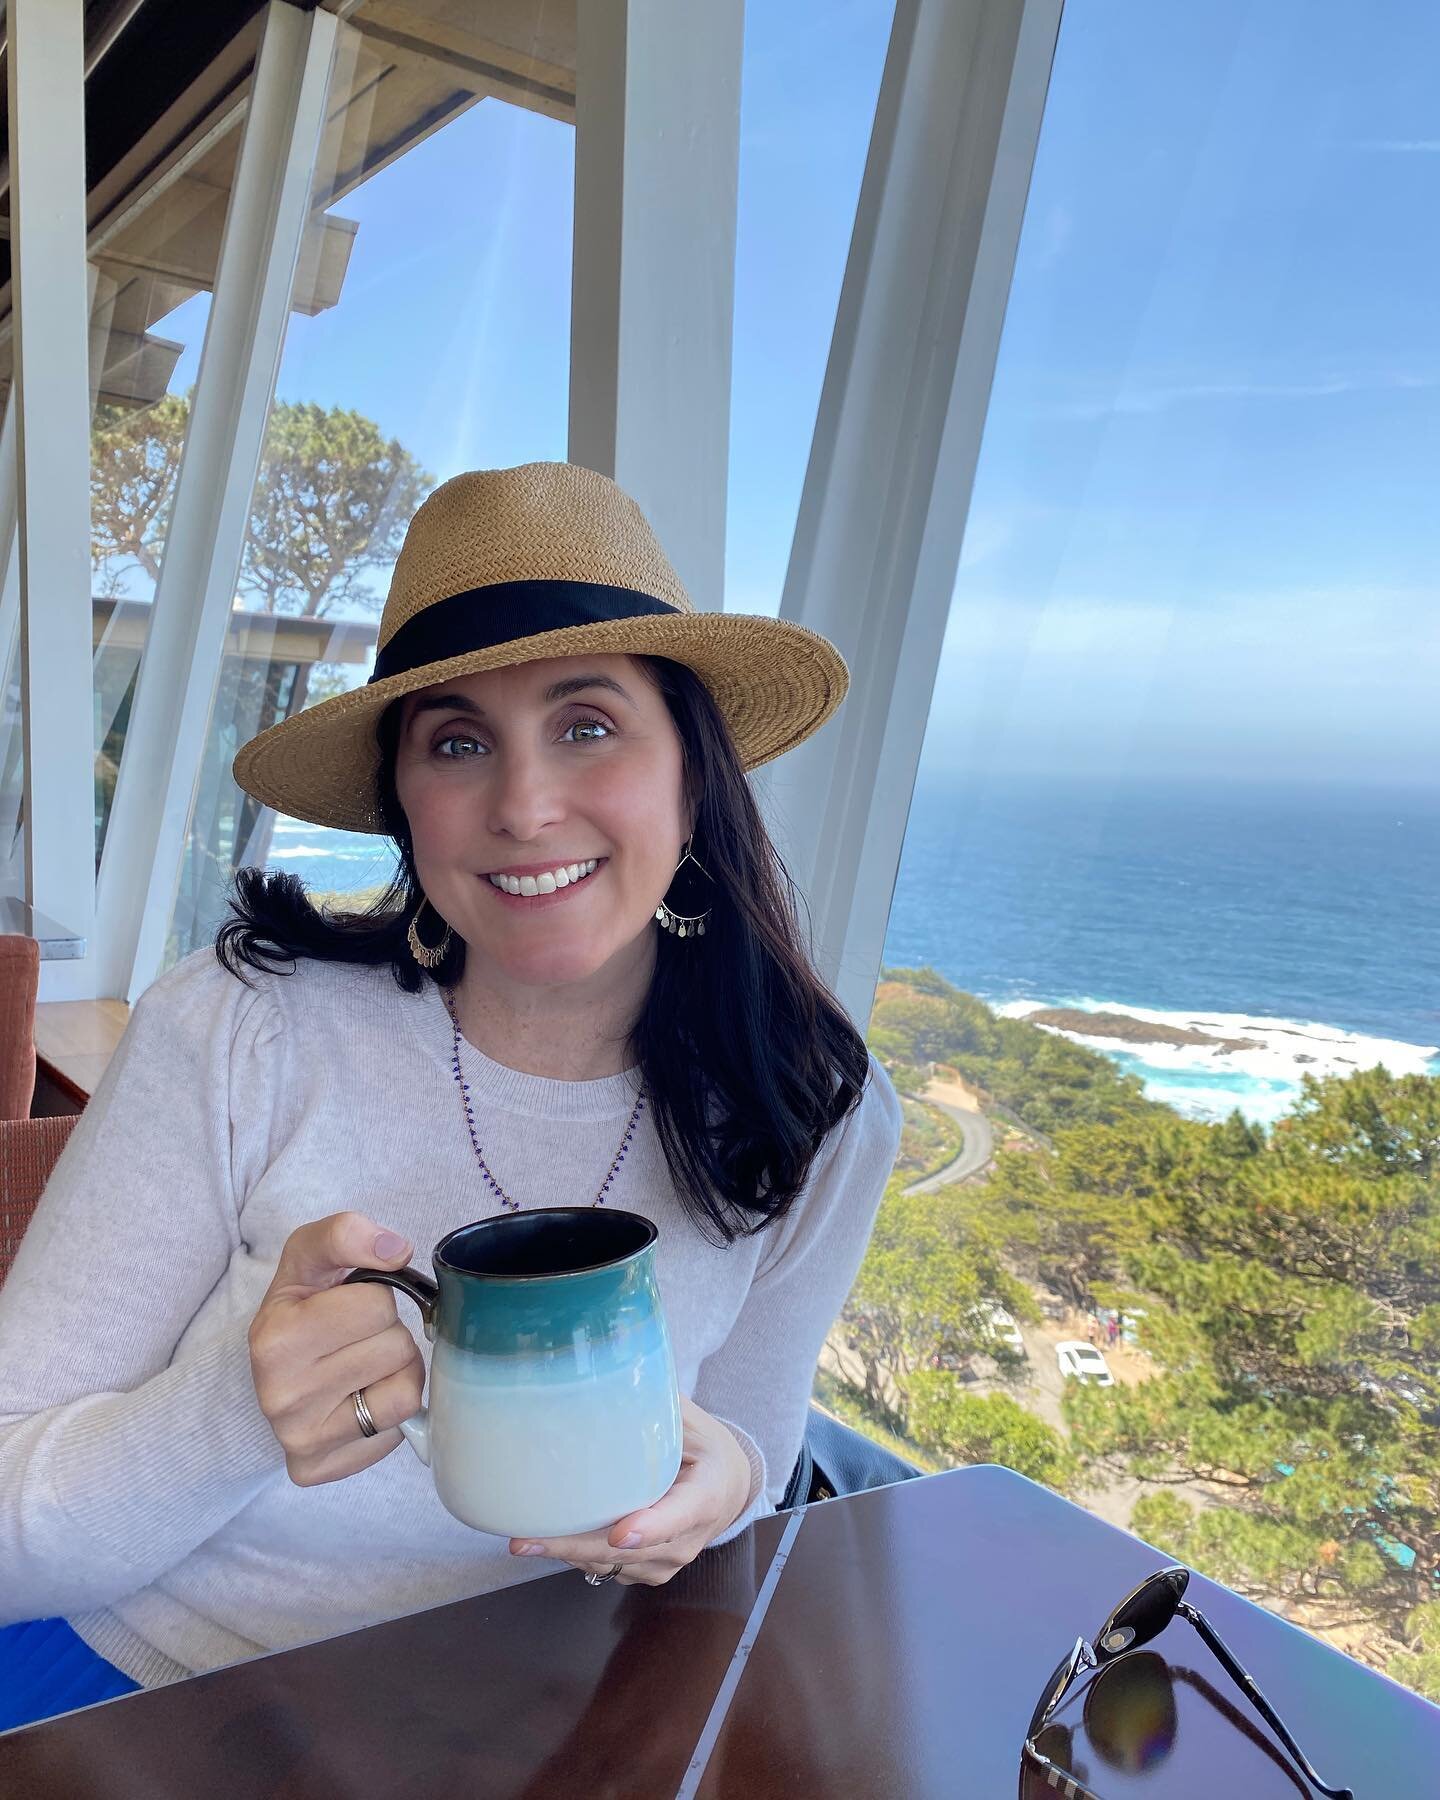 ☕️ &ldquo;Is this silly?&rdquo;⤵️

Last weekend, I drove a long way just so I could have coffee with a view. Before I hit the road, I kept debating whether I should do more productive or practical things instead. I thought to myself : &ldquo;Is this 